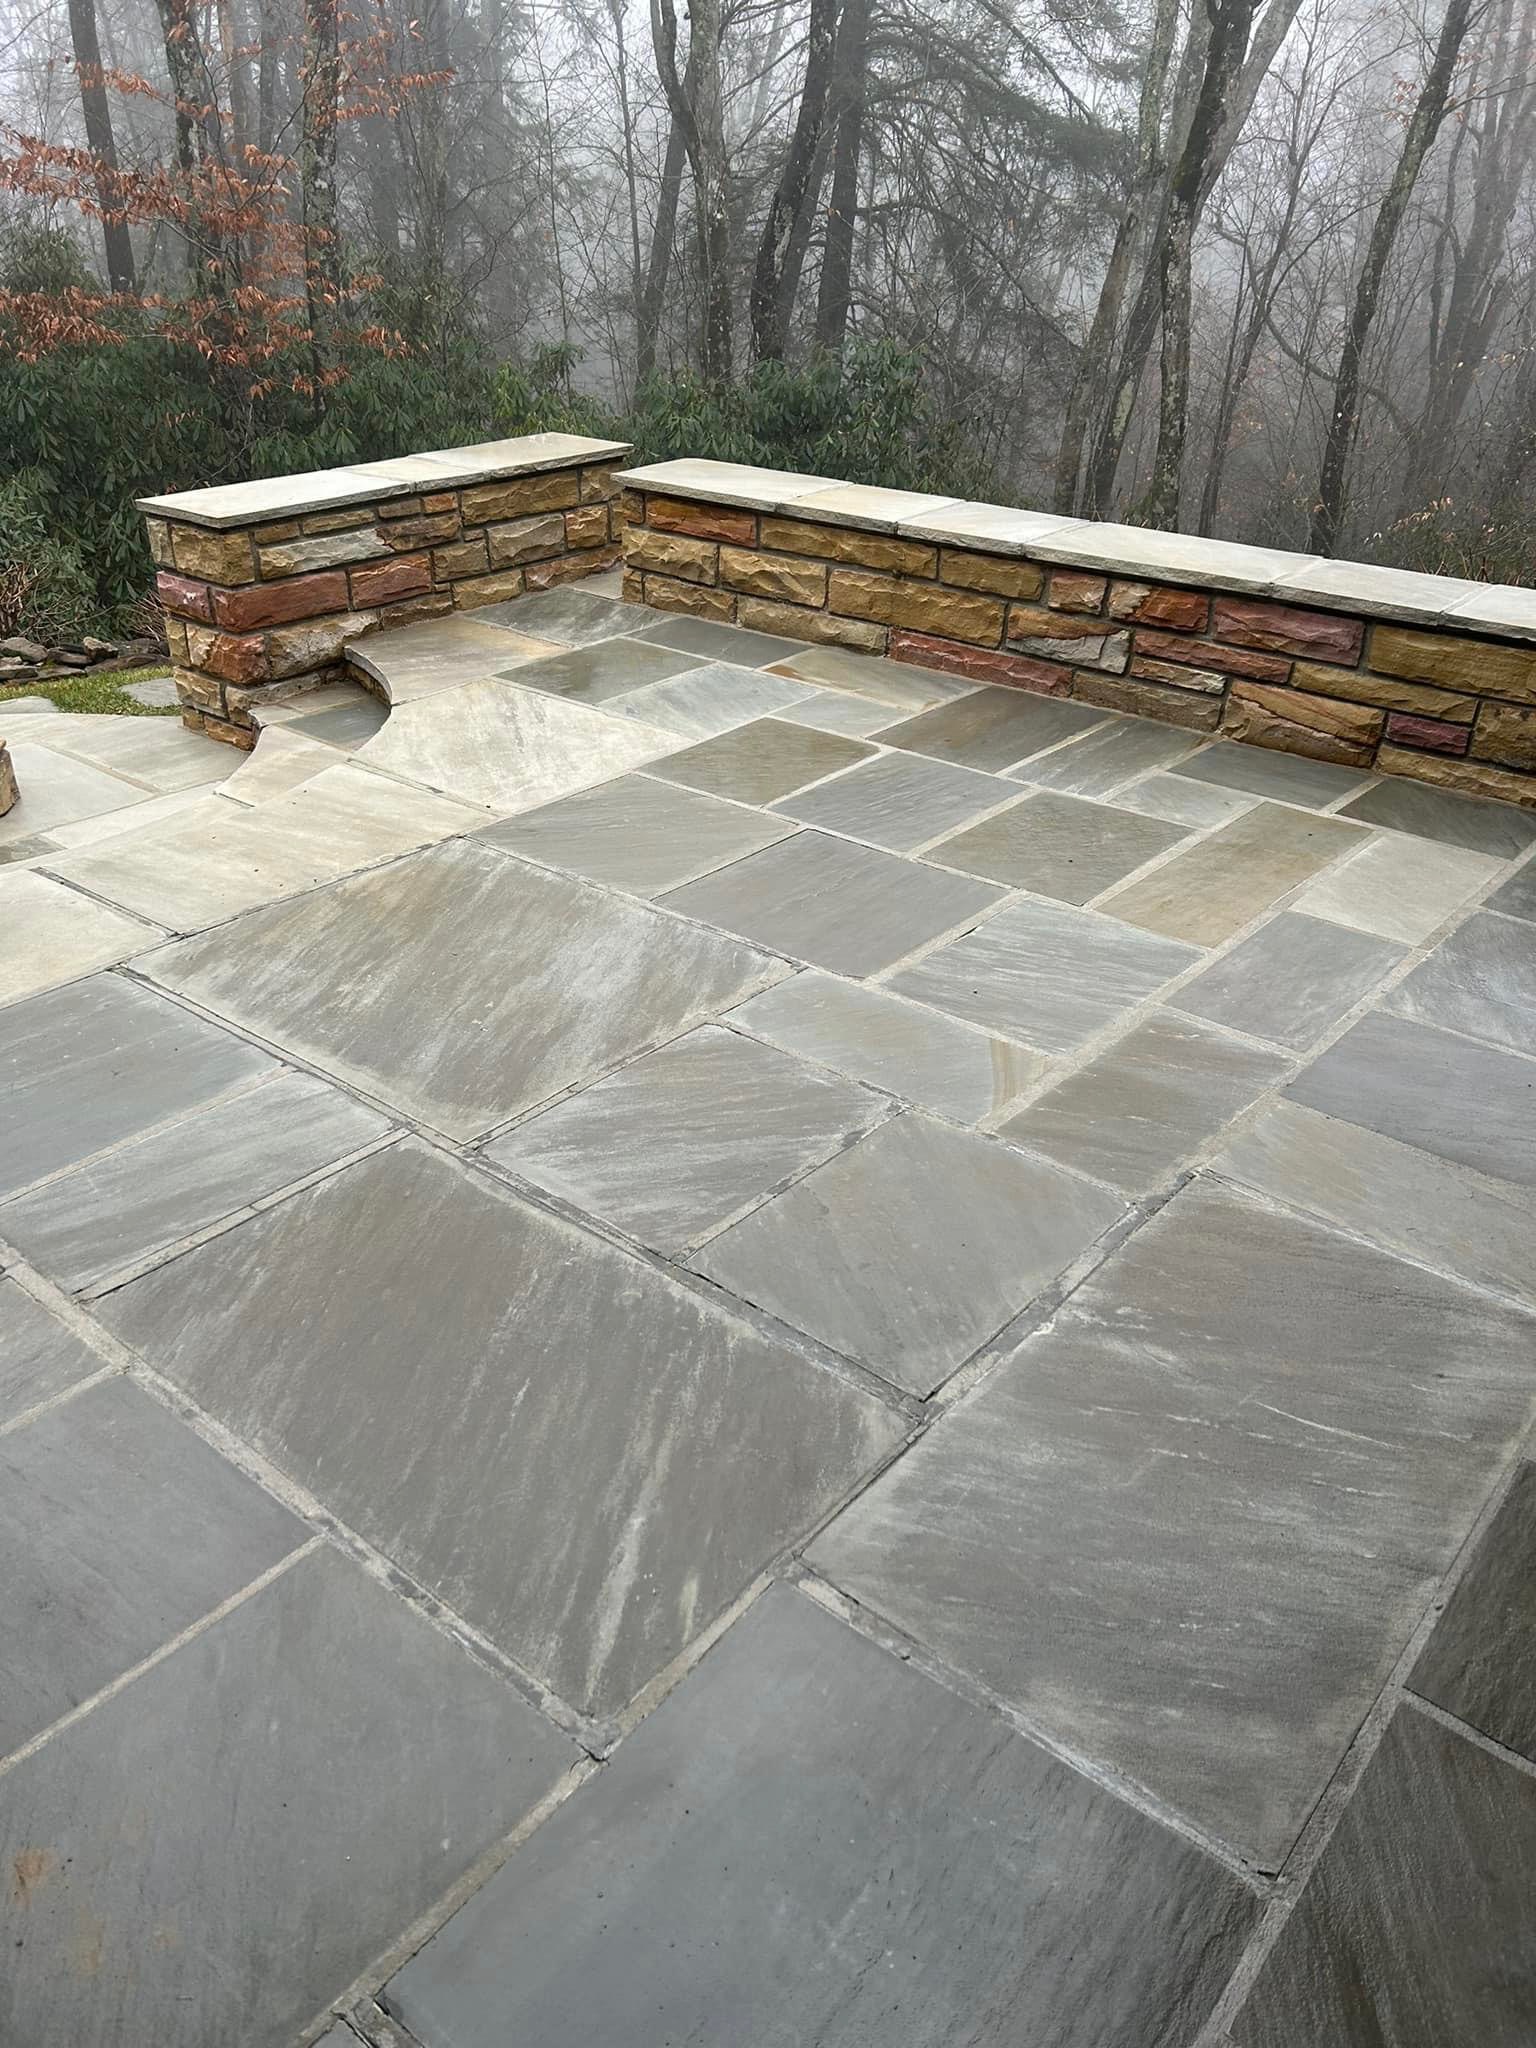 Flagstone Patio Cleaning preformed by Appalachian Softwash LLC In linville North Carolina  Image